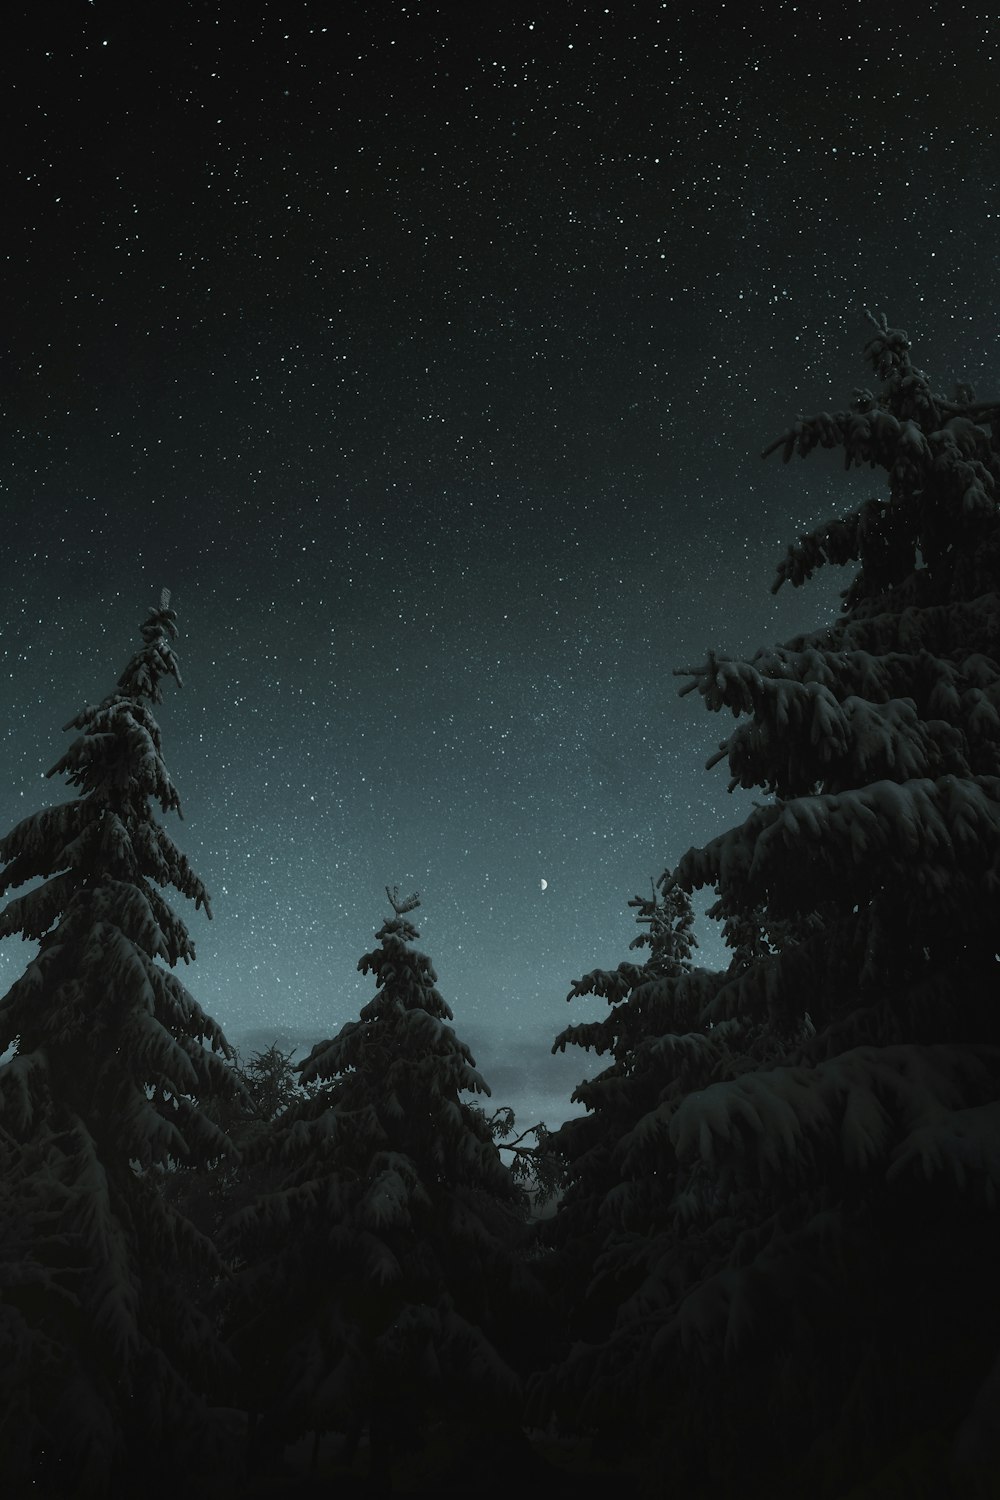 a night sky with stars and trees covered in snow